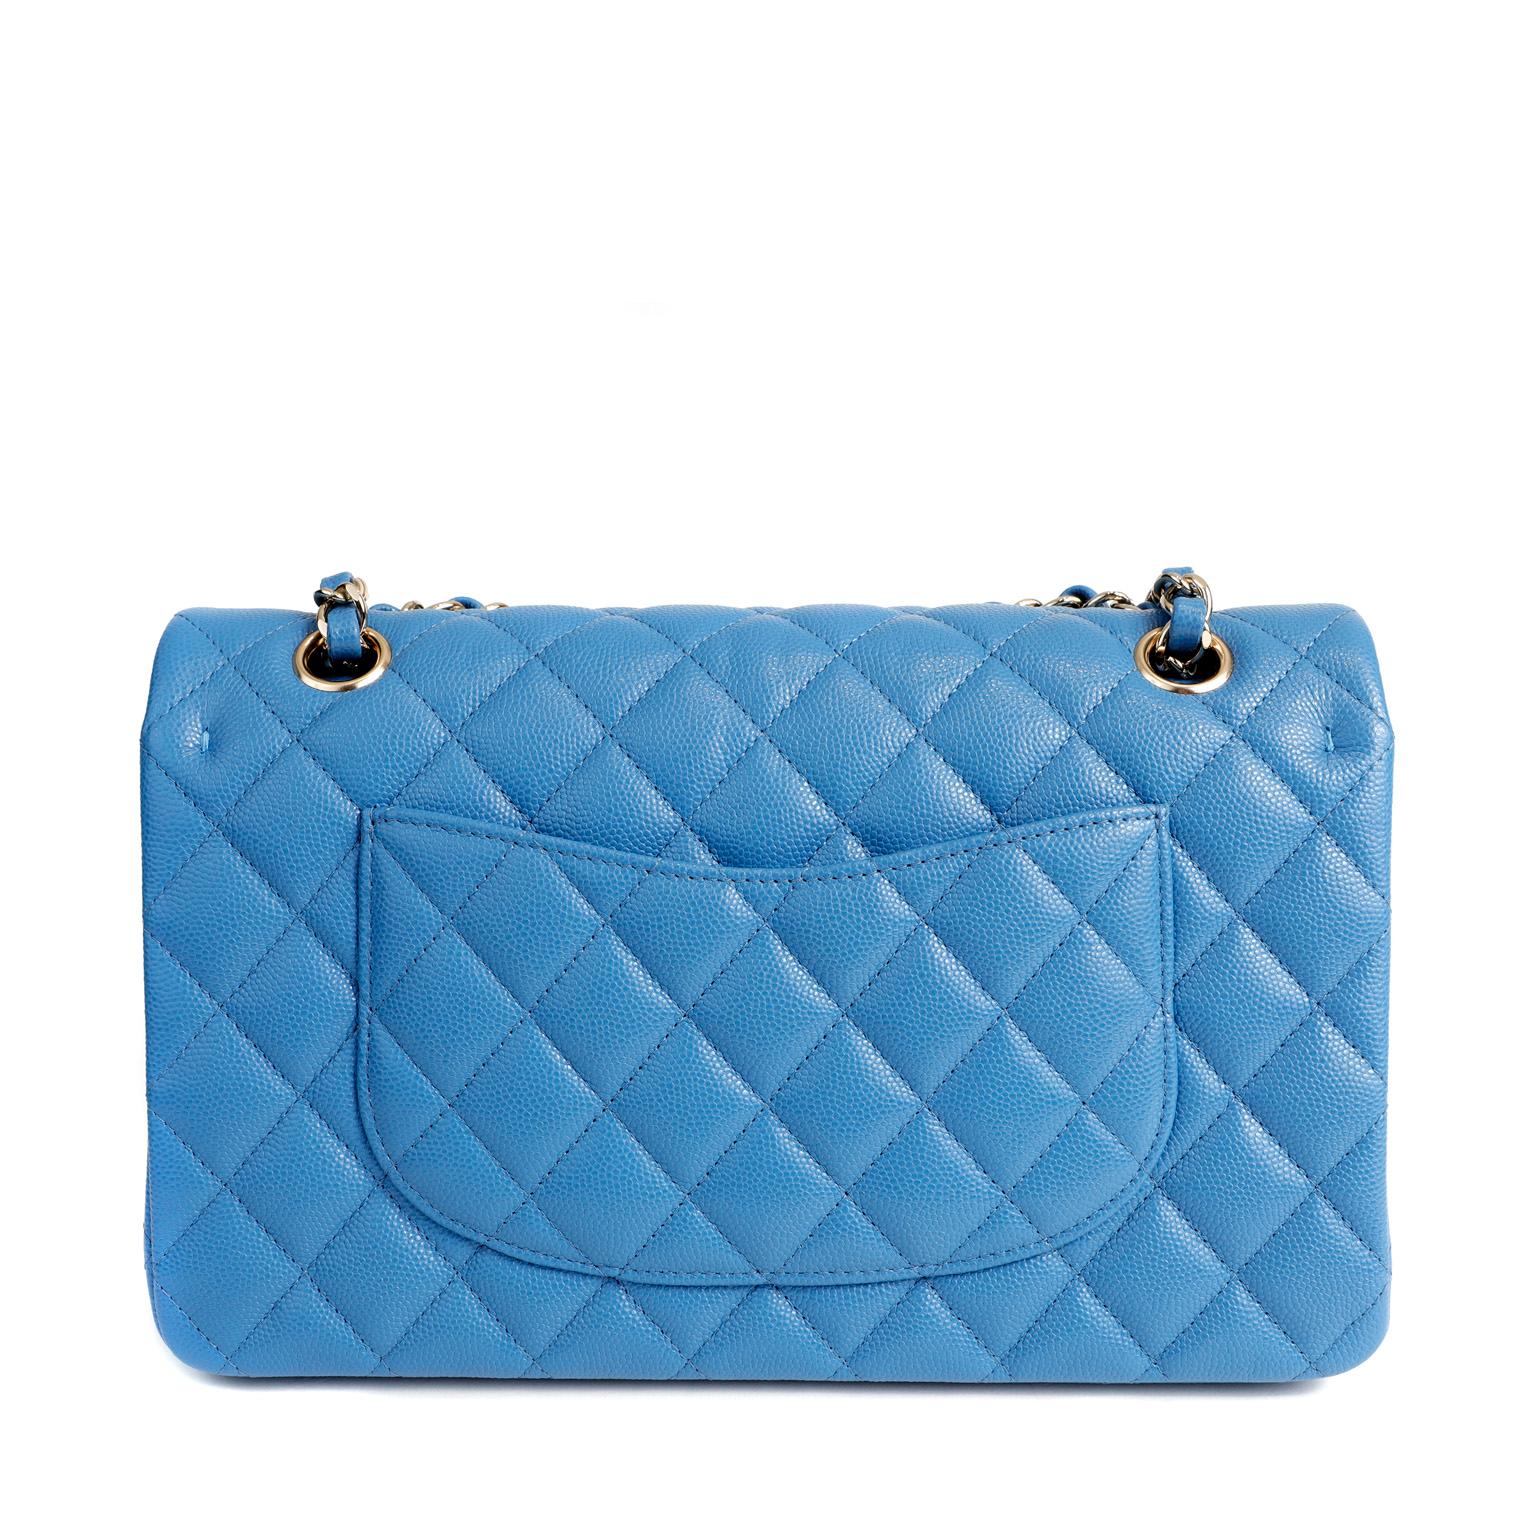 chanel periwinkle blue